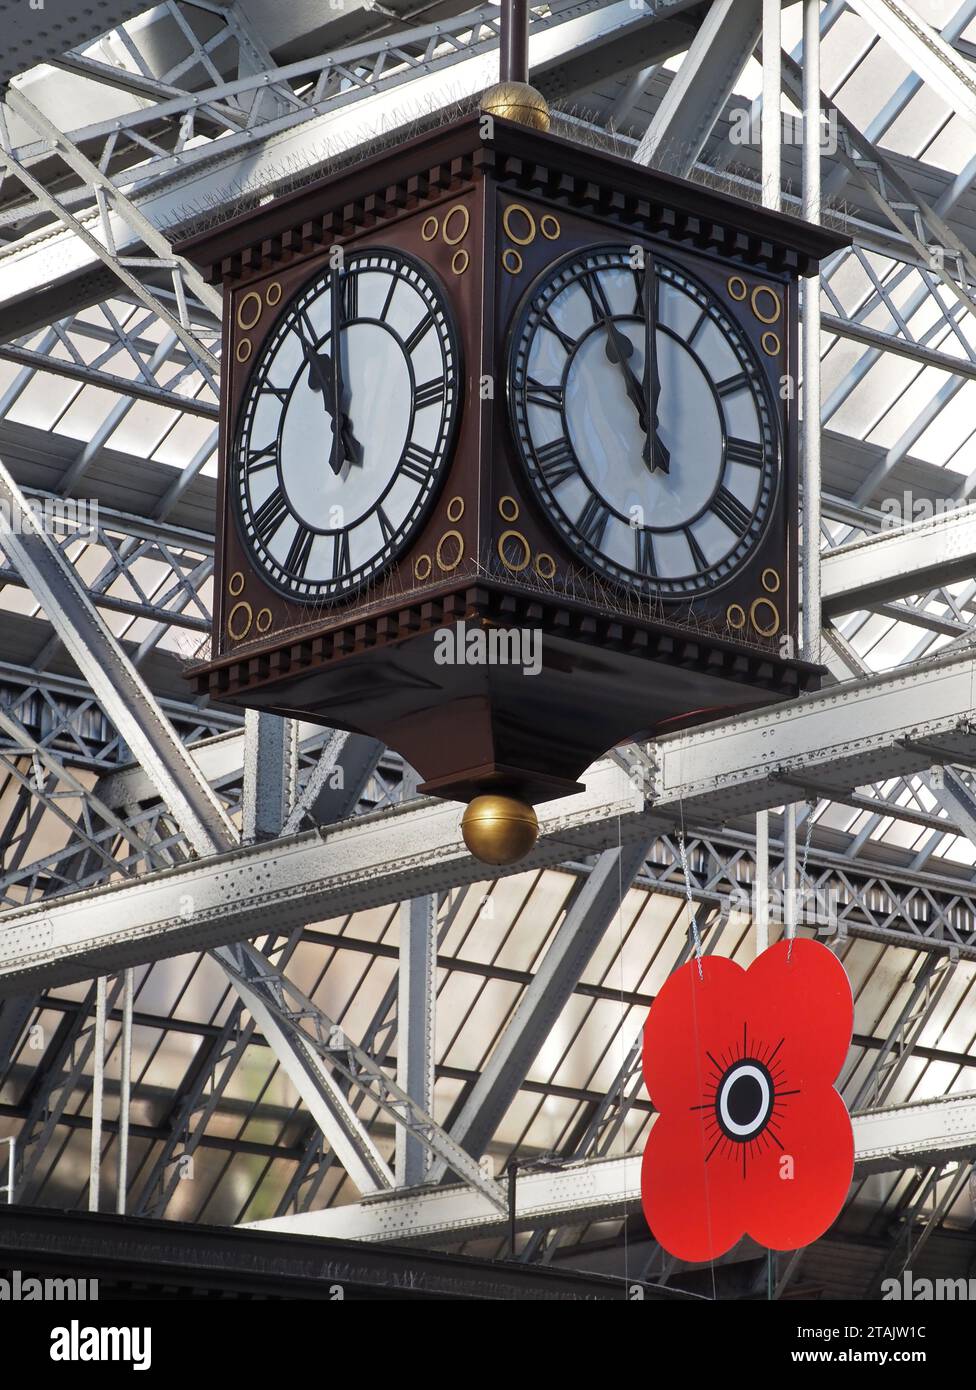 At the eleventh hour of the eleventh day of the eleventh month. Glasgow Central Station clock Stock Photo